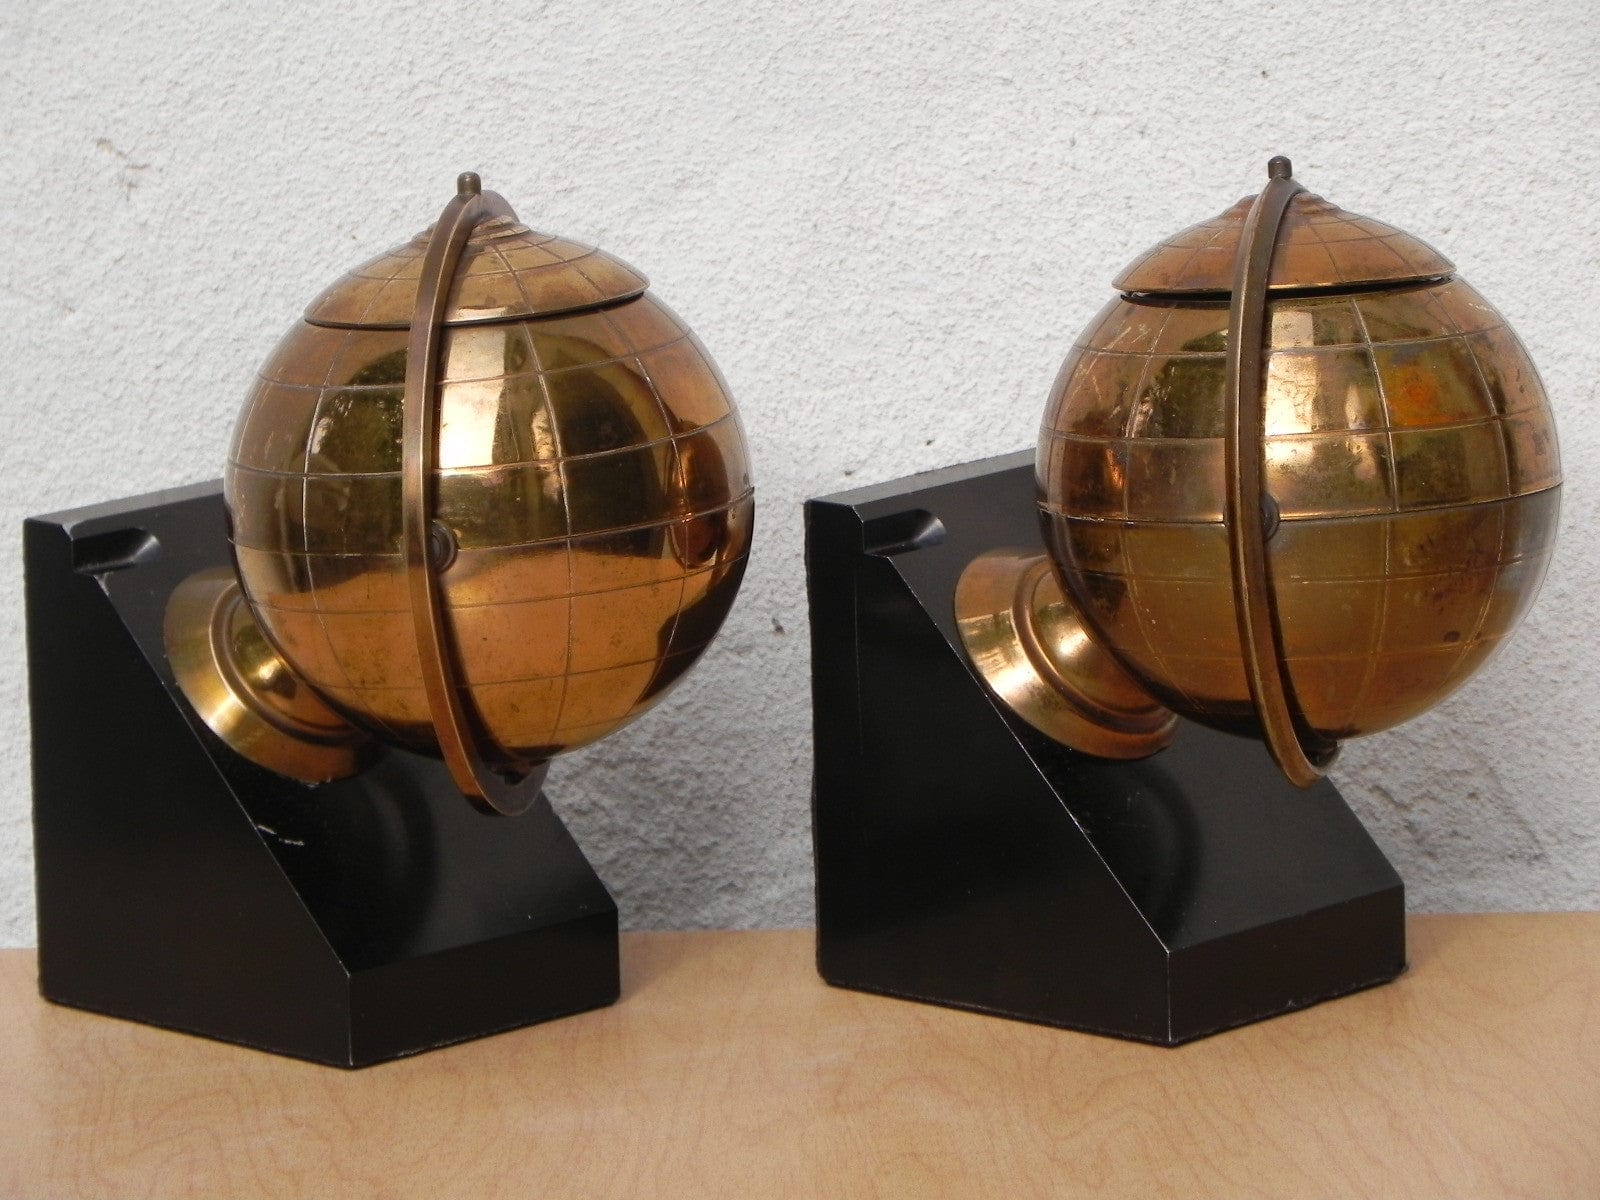 I Like Mike's Mid-Century Modern Accessories Globe Metal Bookends with Tobacco Holder Compartments